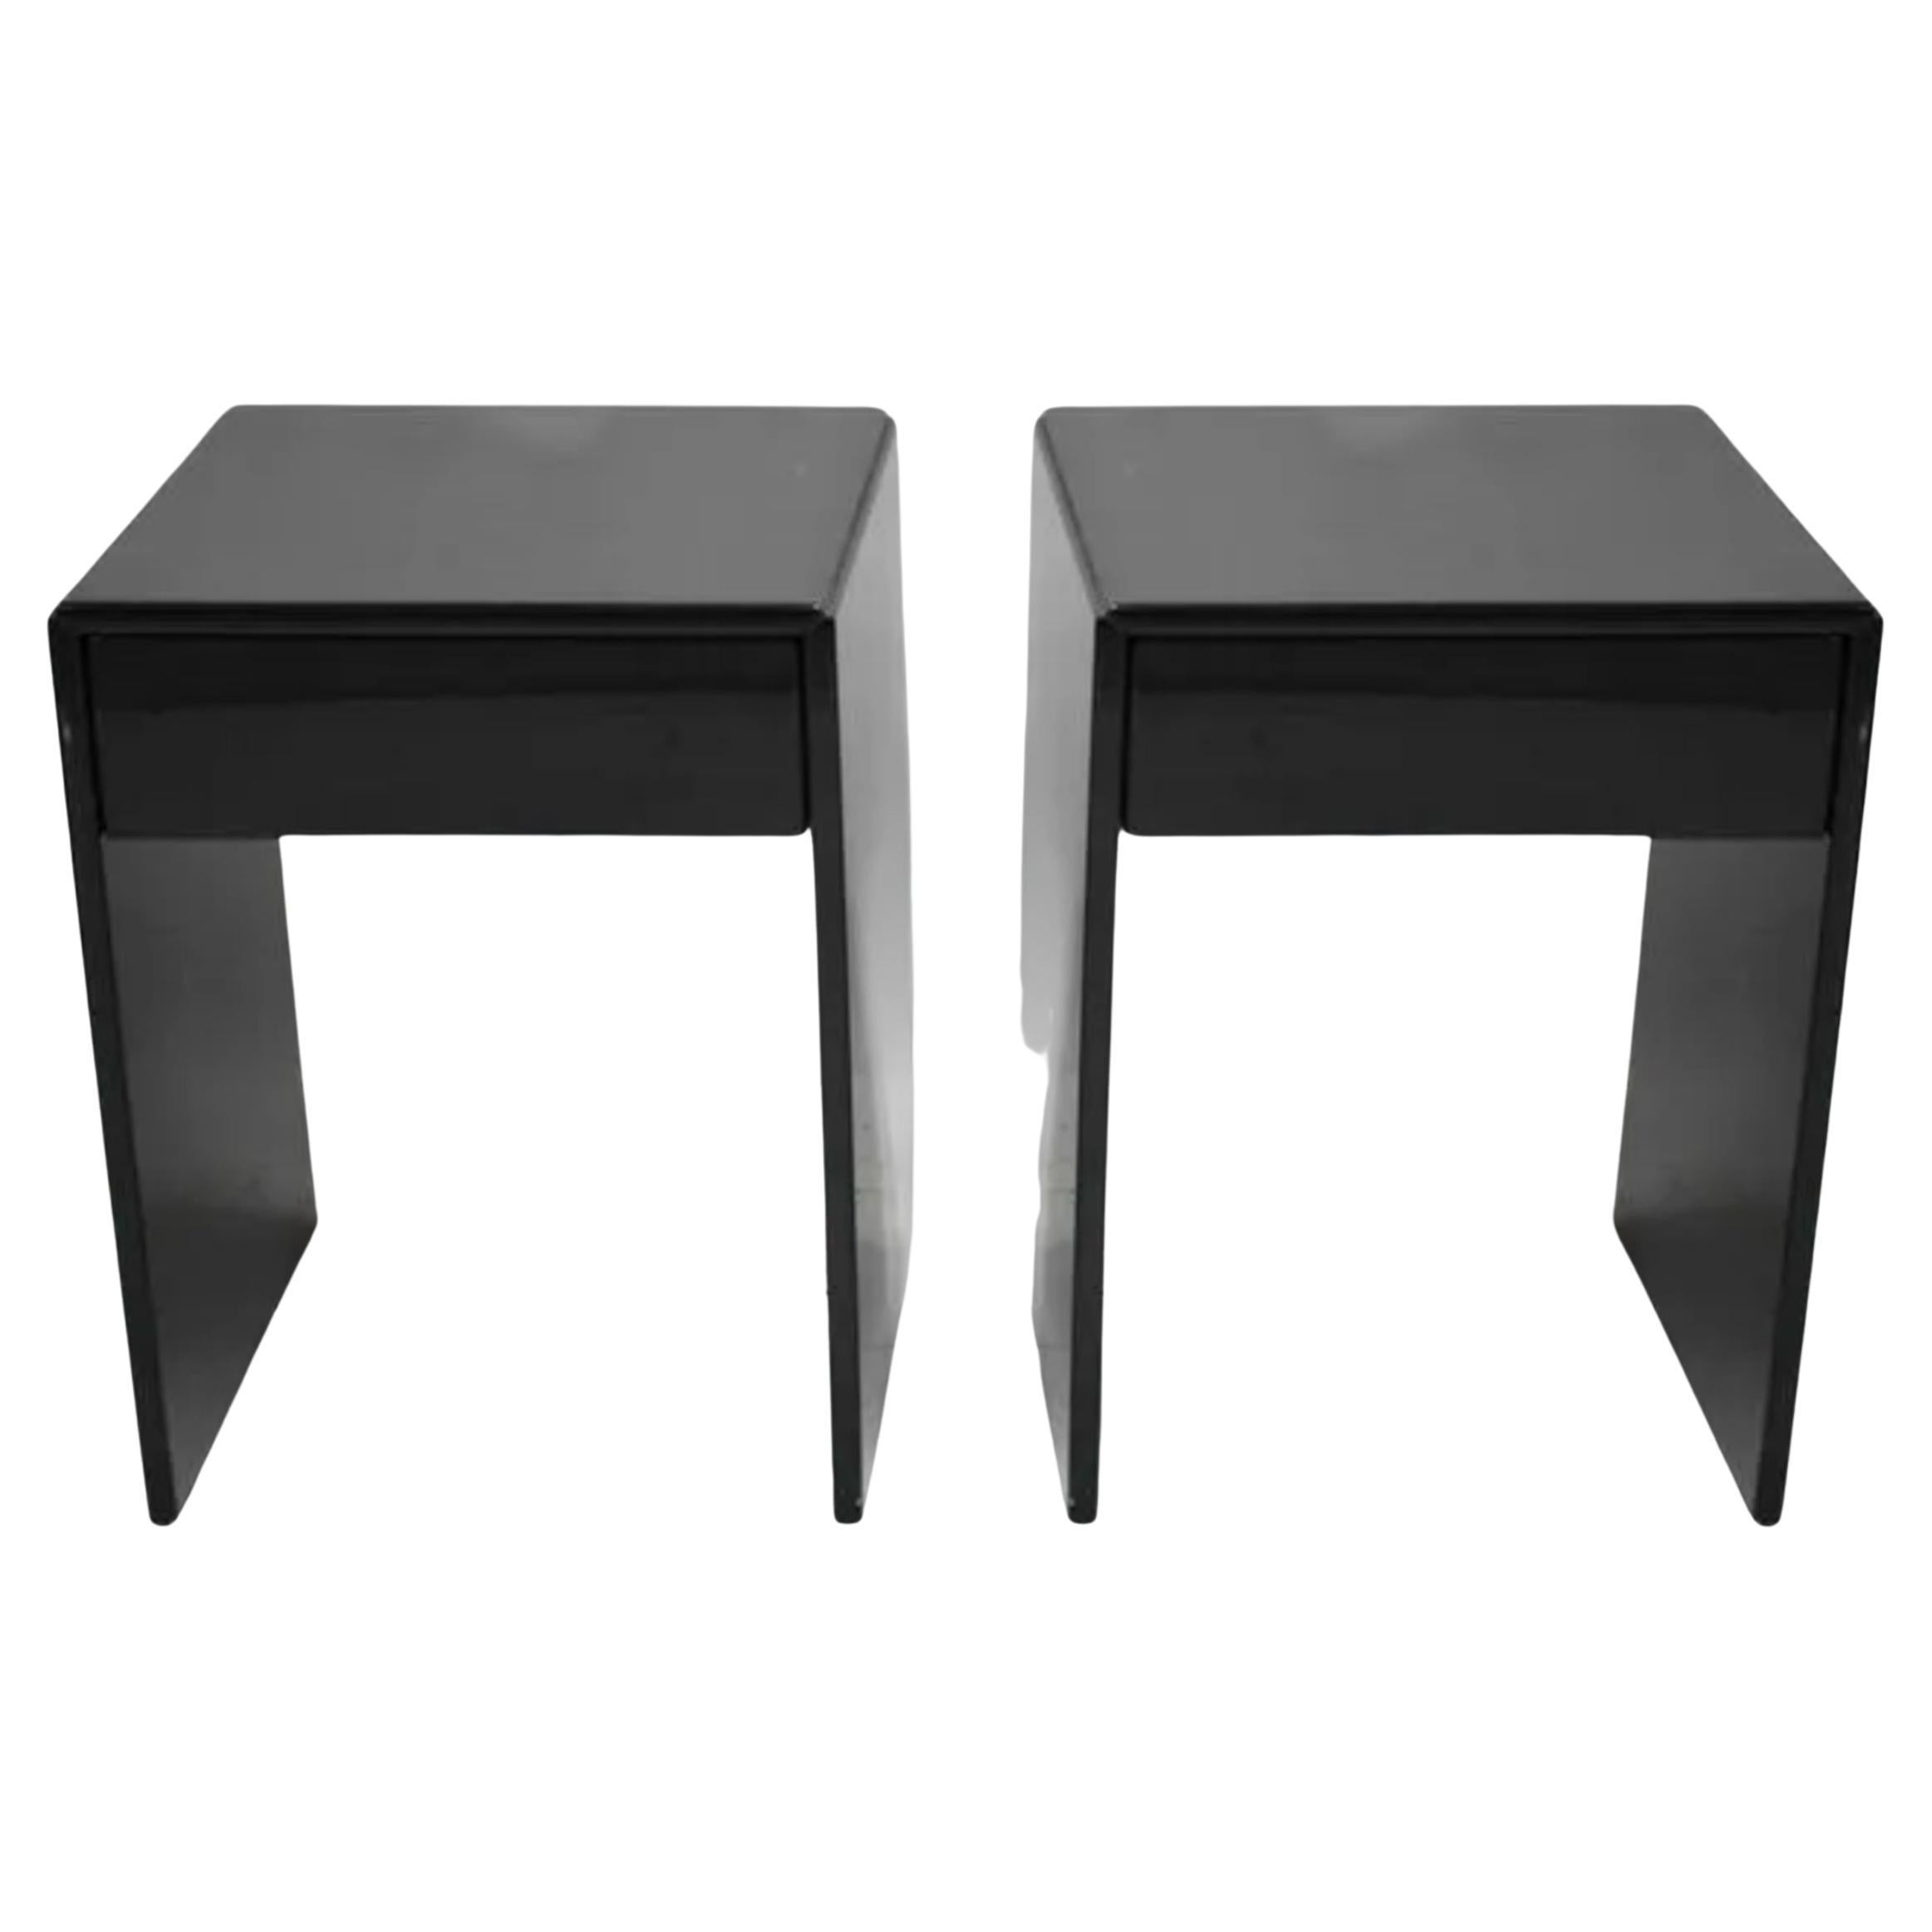 Pair of petite Minimalist midcentury Paul Mayen high gloss black nightstands with single drawer for Habitat. High Gloss finish in Black. Solid wood construction with drawer slides. Labeled underneath. Circa 1970. Show little signs of use. Located in